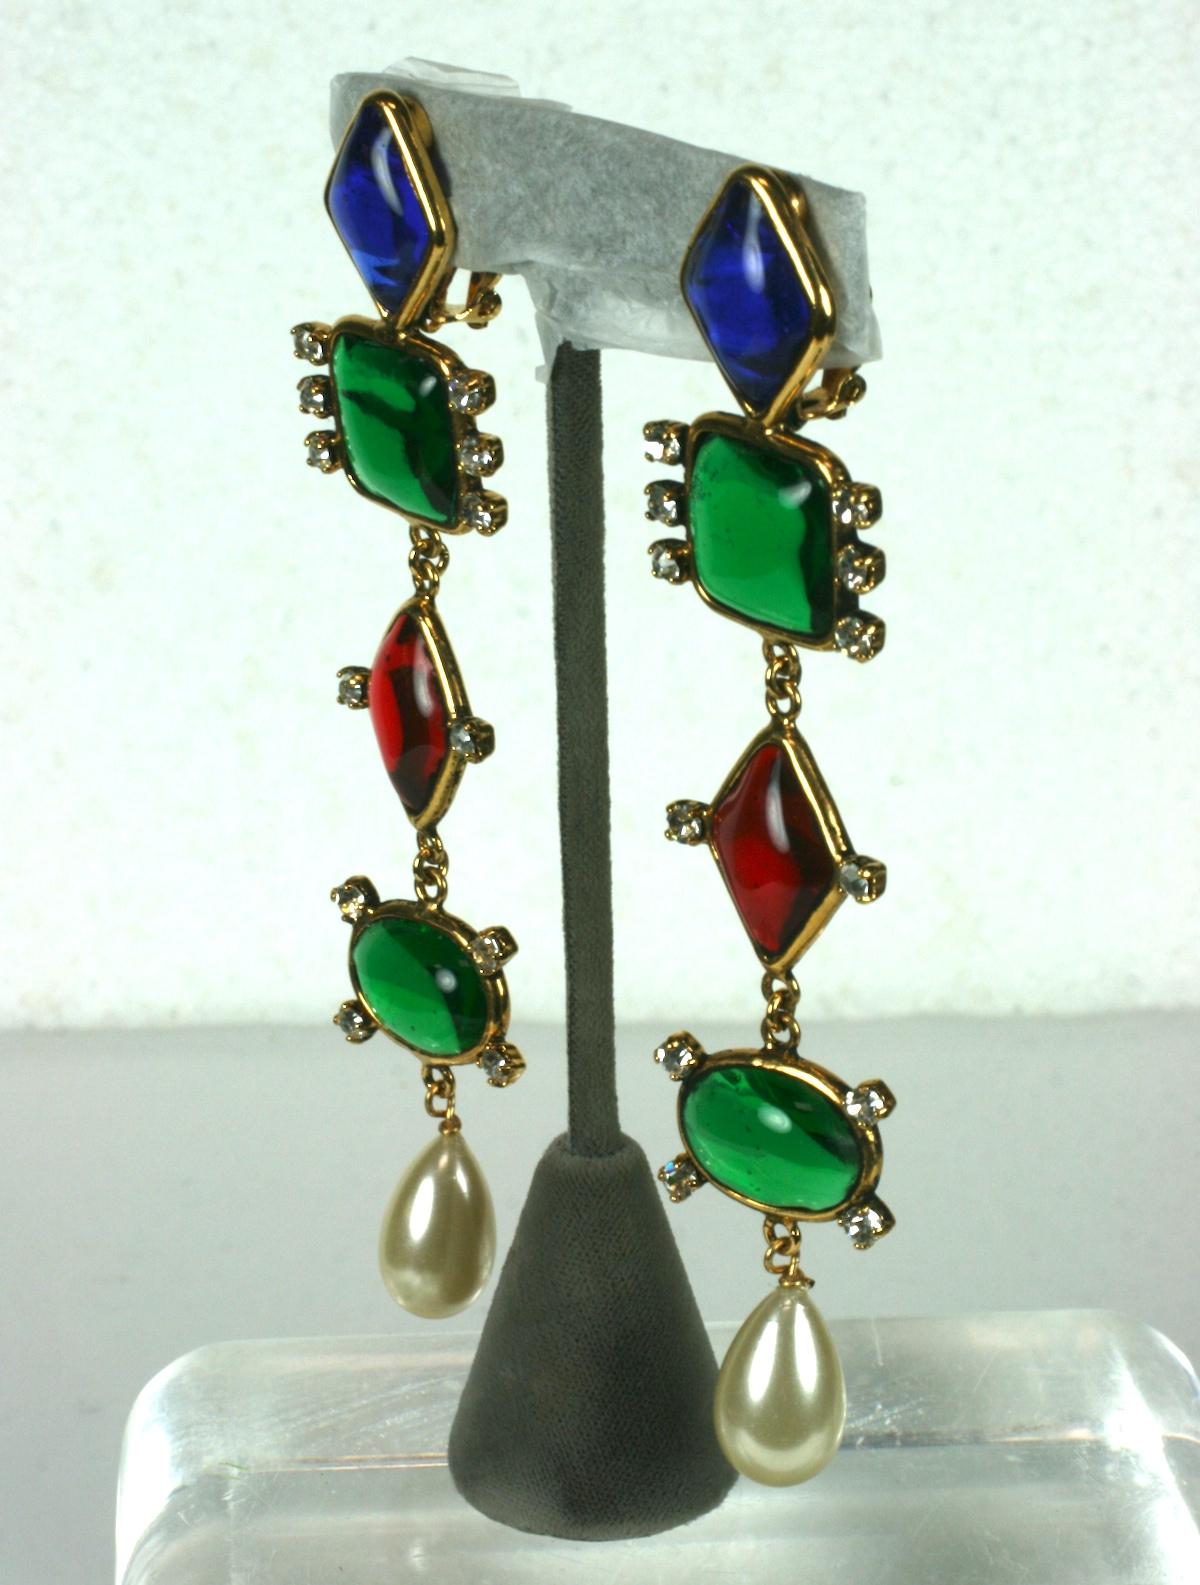 Amazing long Chanel Runway Earrings, Maison Gripoix. Completely handmade bezels with signature ruby, emerald and sapphire poured glass accented with pastes accented with a handmade poured glass pearl.
Unsigned as is common with extravagant Runway or